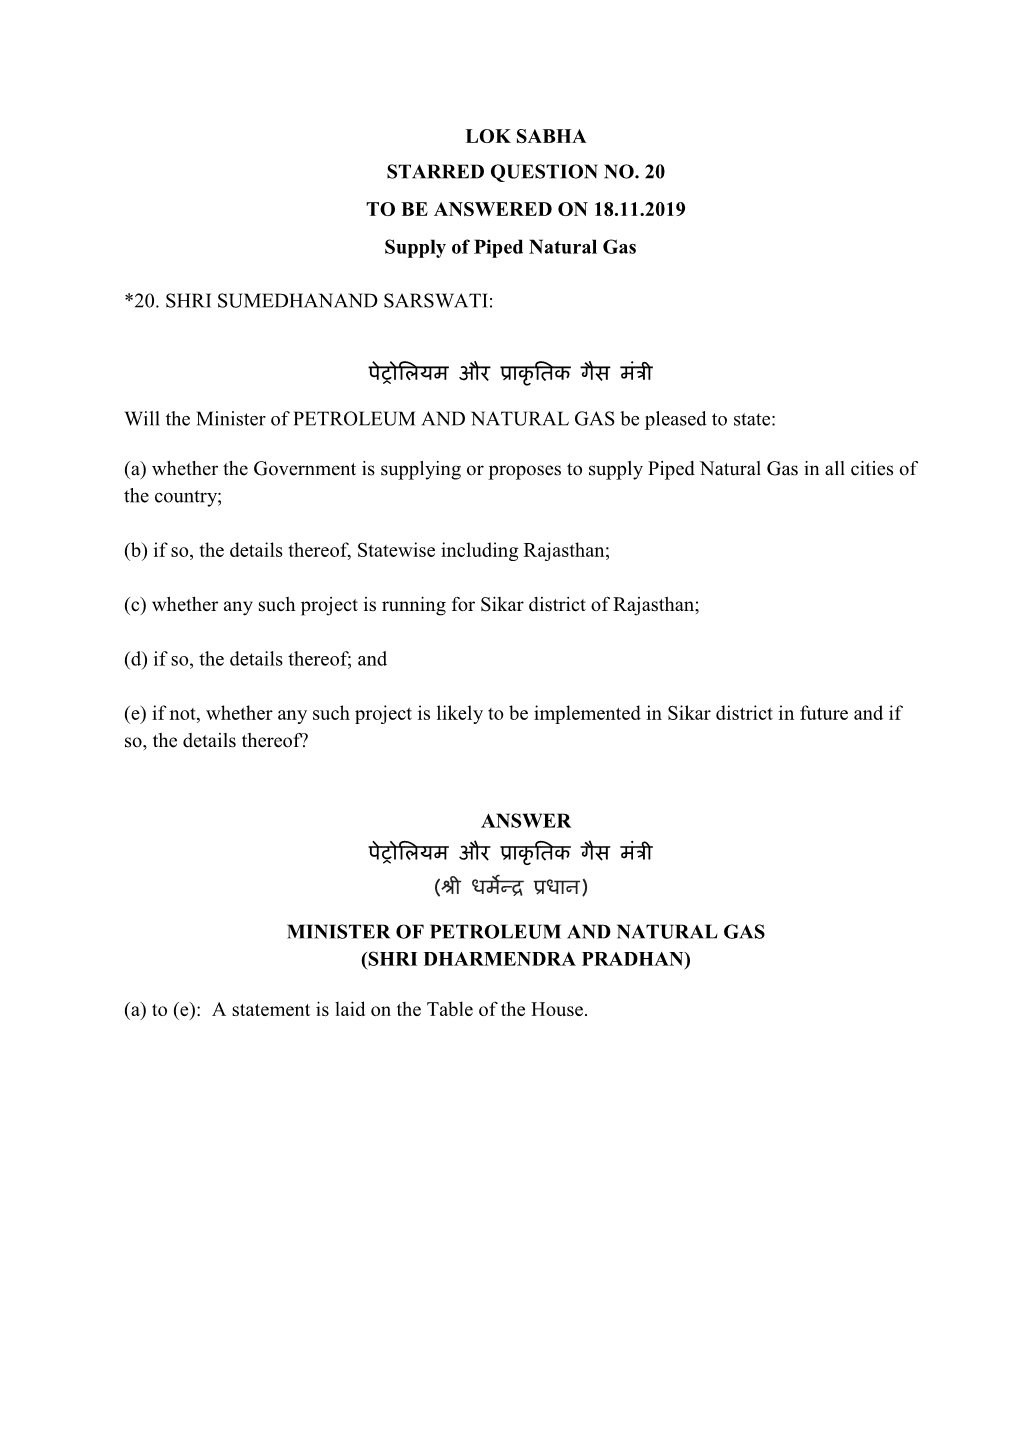 LOK SABHA STARRED QUESTION NO. 20 to BE ANSWERED on 18.11.2019 REGARDING SUPPLY of PIPED NATURAL GAS List of Geographical Areas Covered Till 10Th CGD Bidding Round